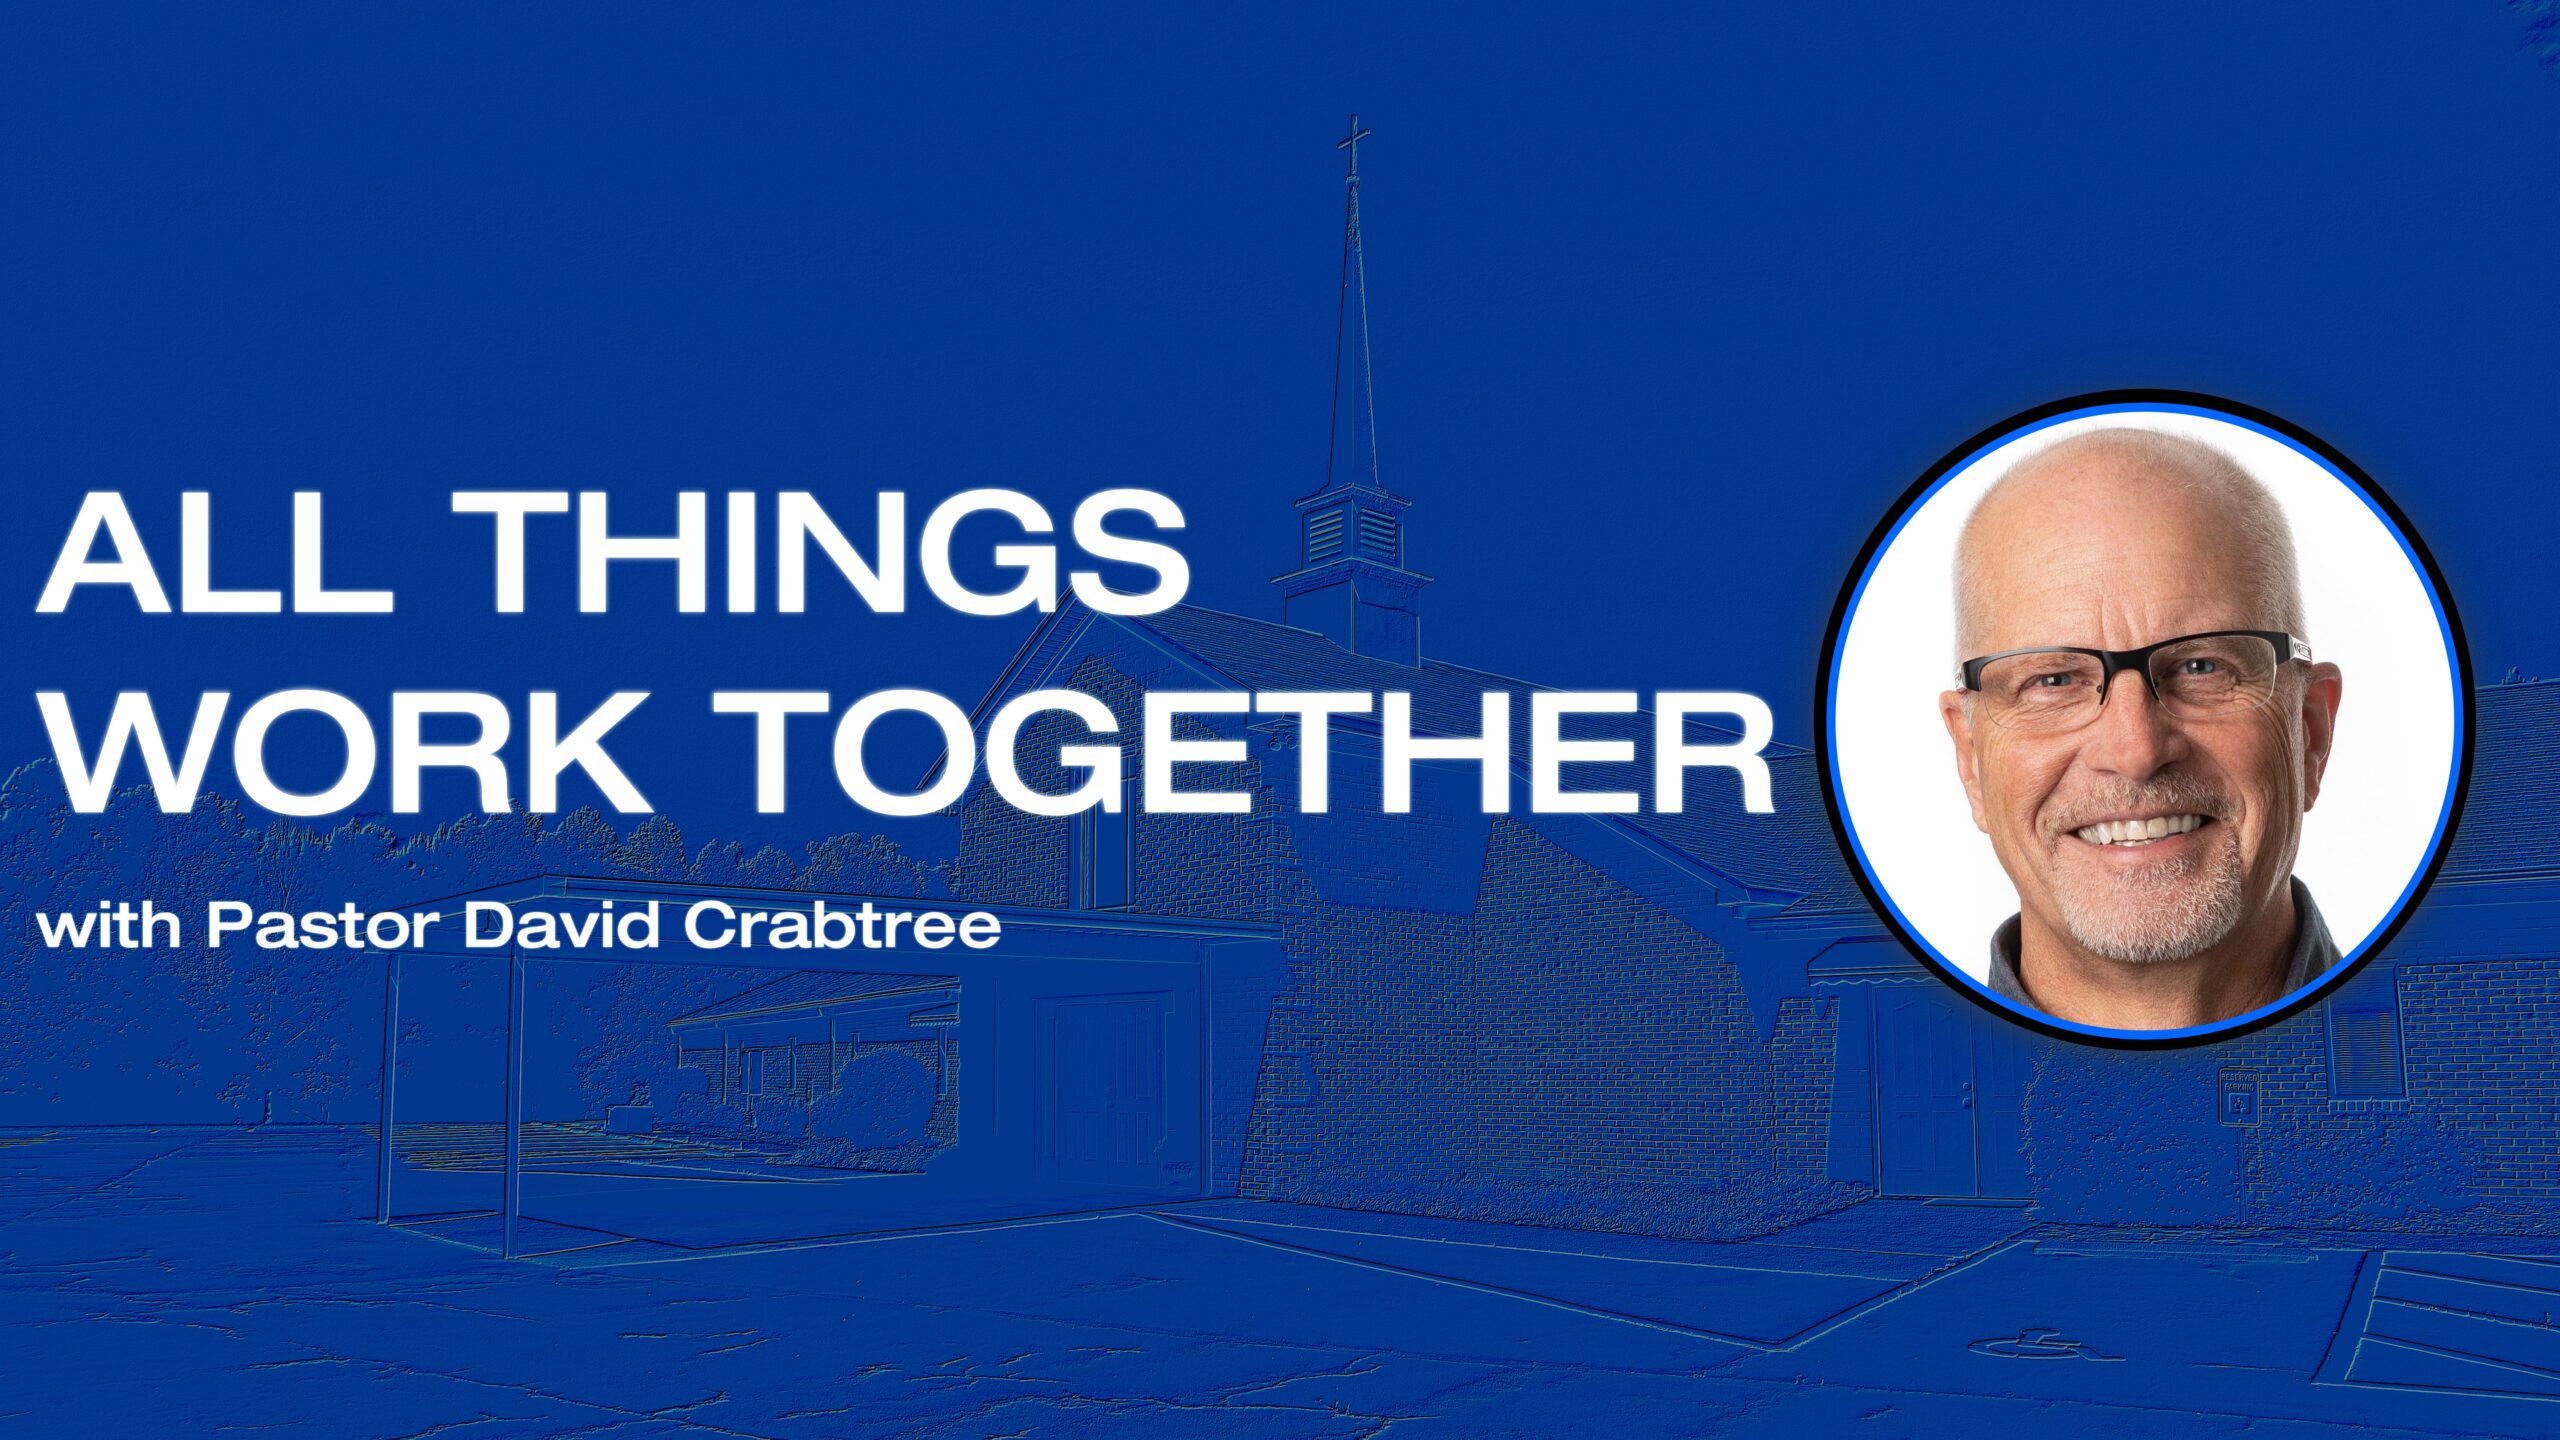 All Things Work Together (with special guest David Crabtree)